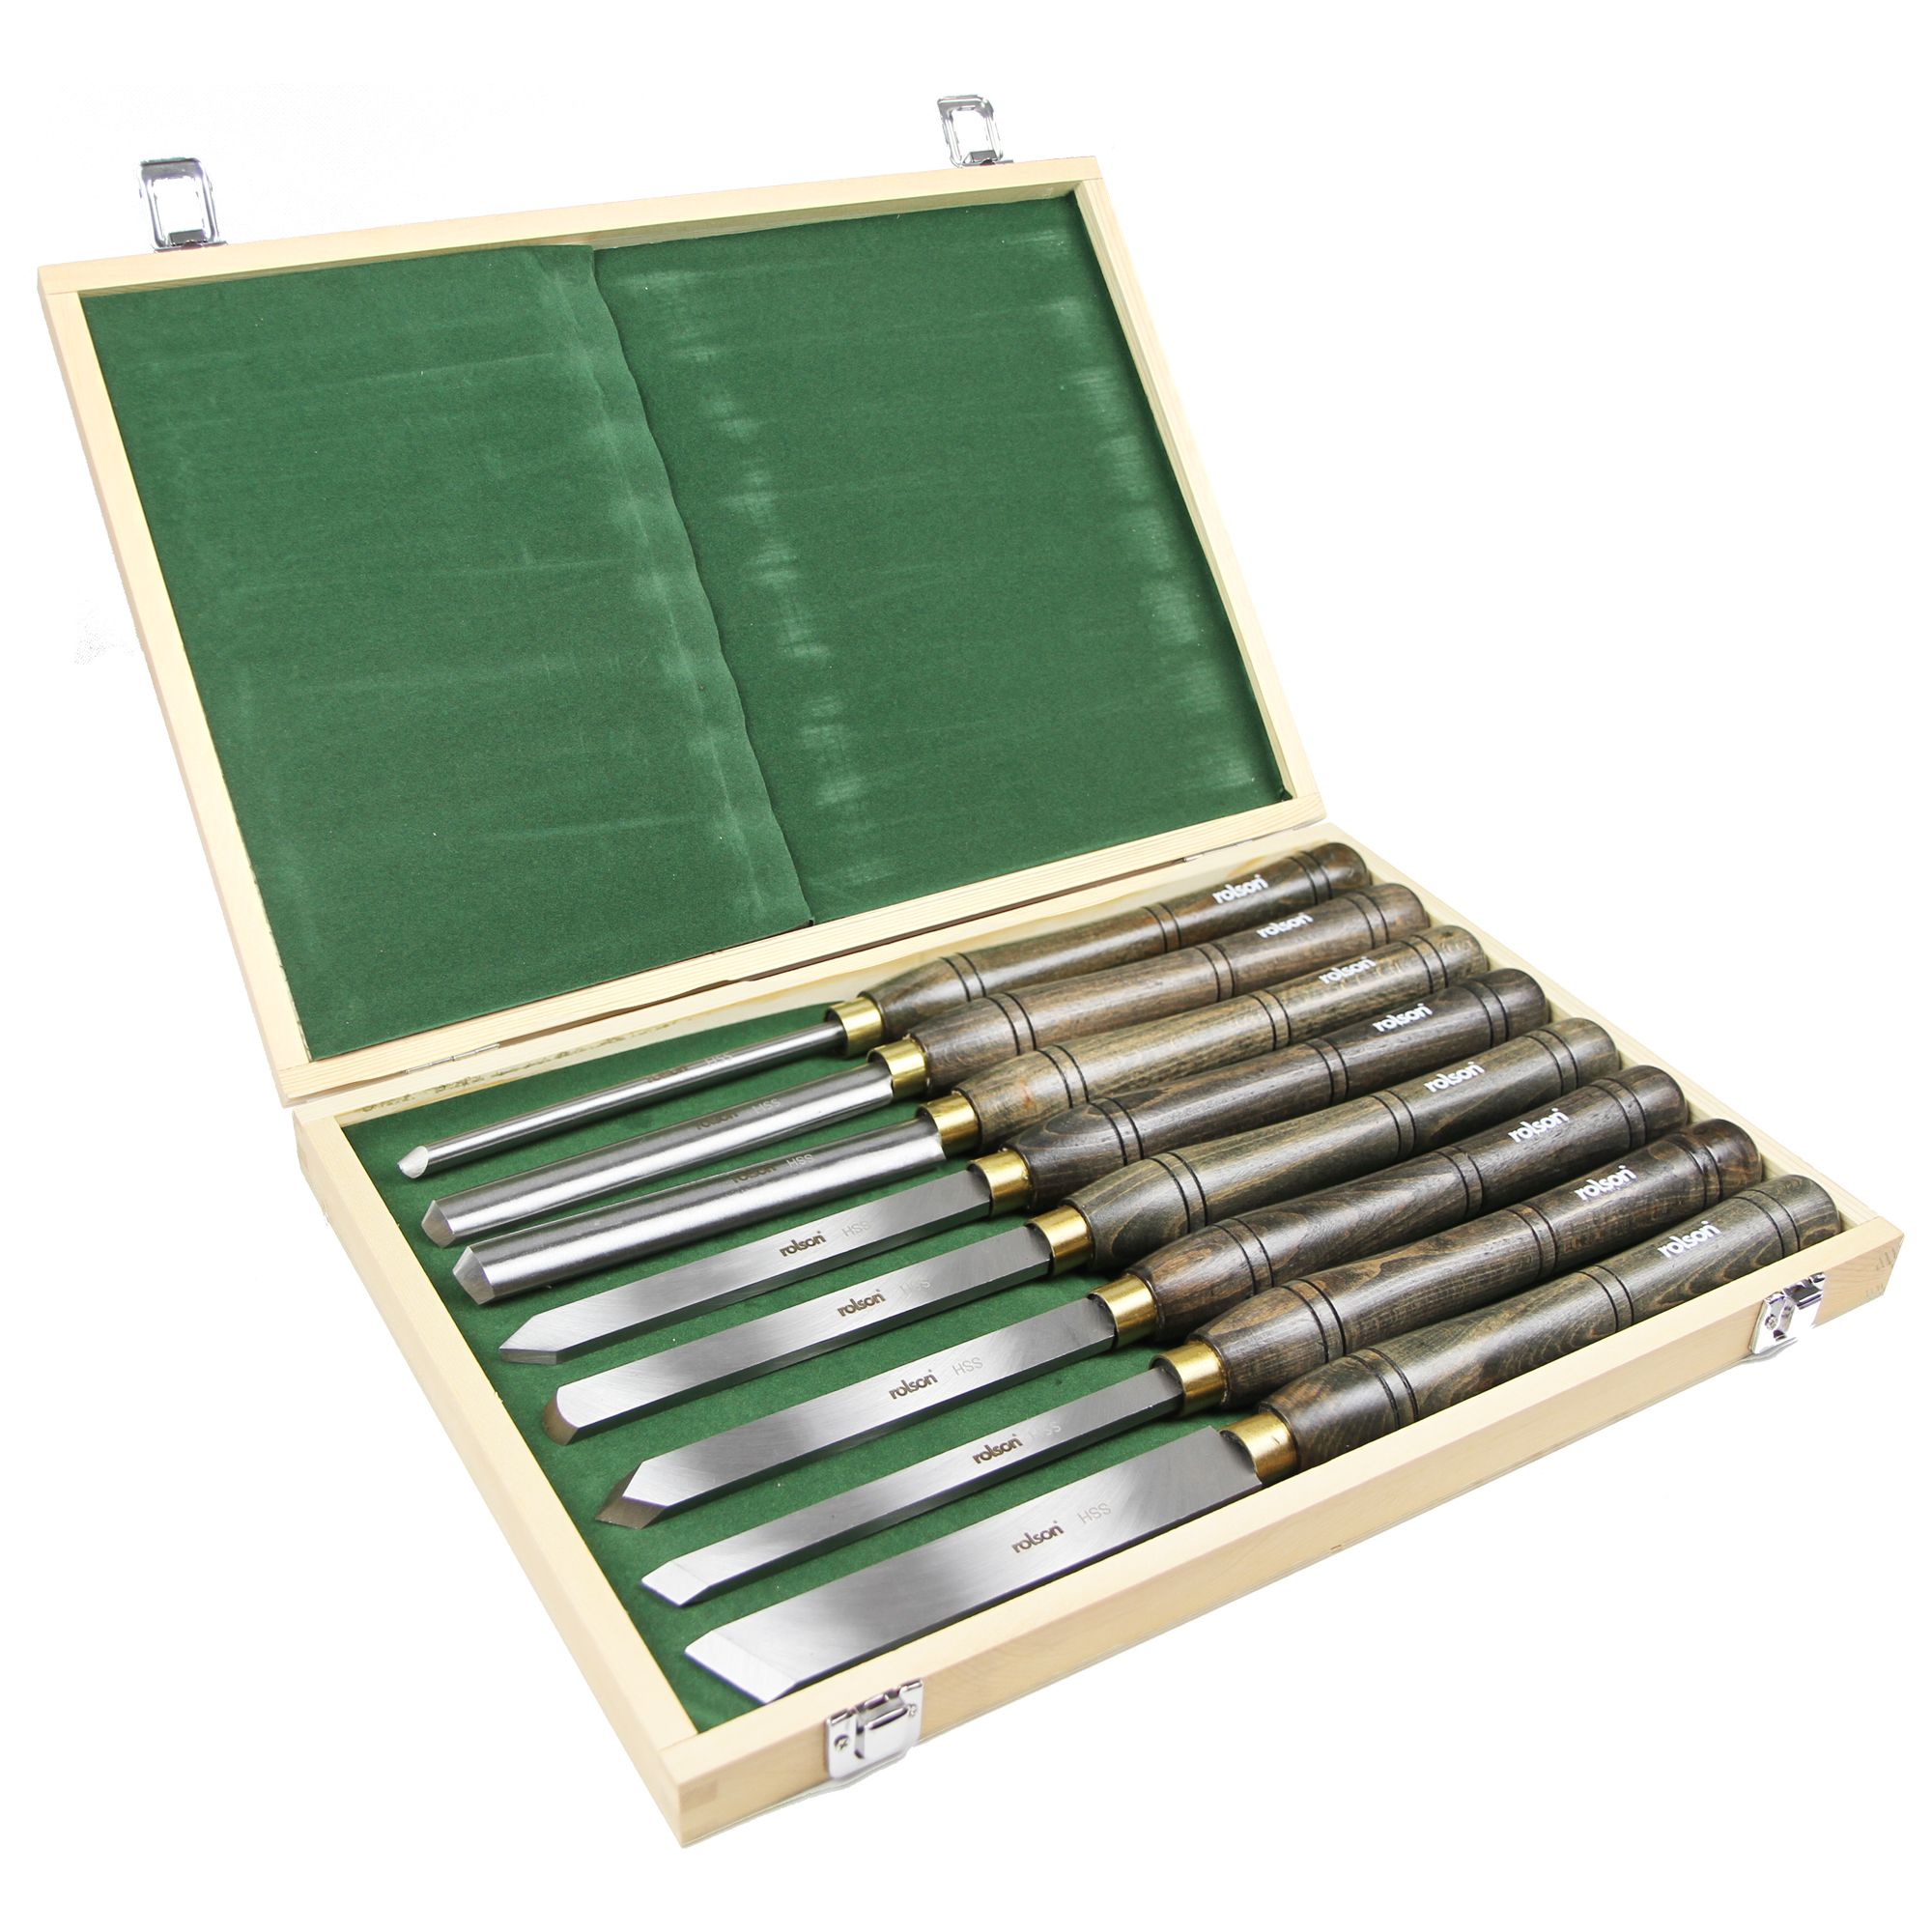 8 Pcs Wood Chisel Set, Fepinc Wood Turning Tools with Honing Guide,  Sharpening Stone and Wooden Storage Case, 60CRV Wood Carving Chisels Set  for